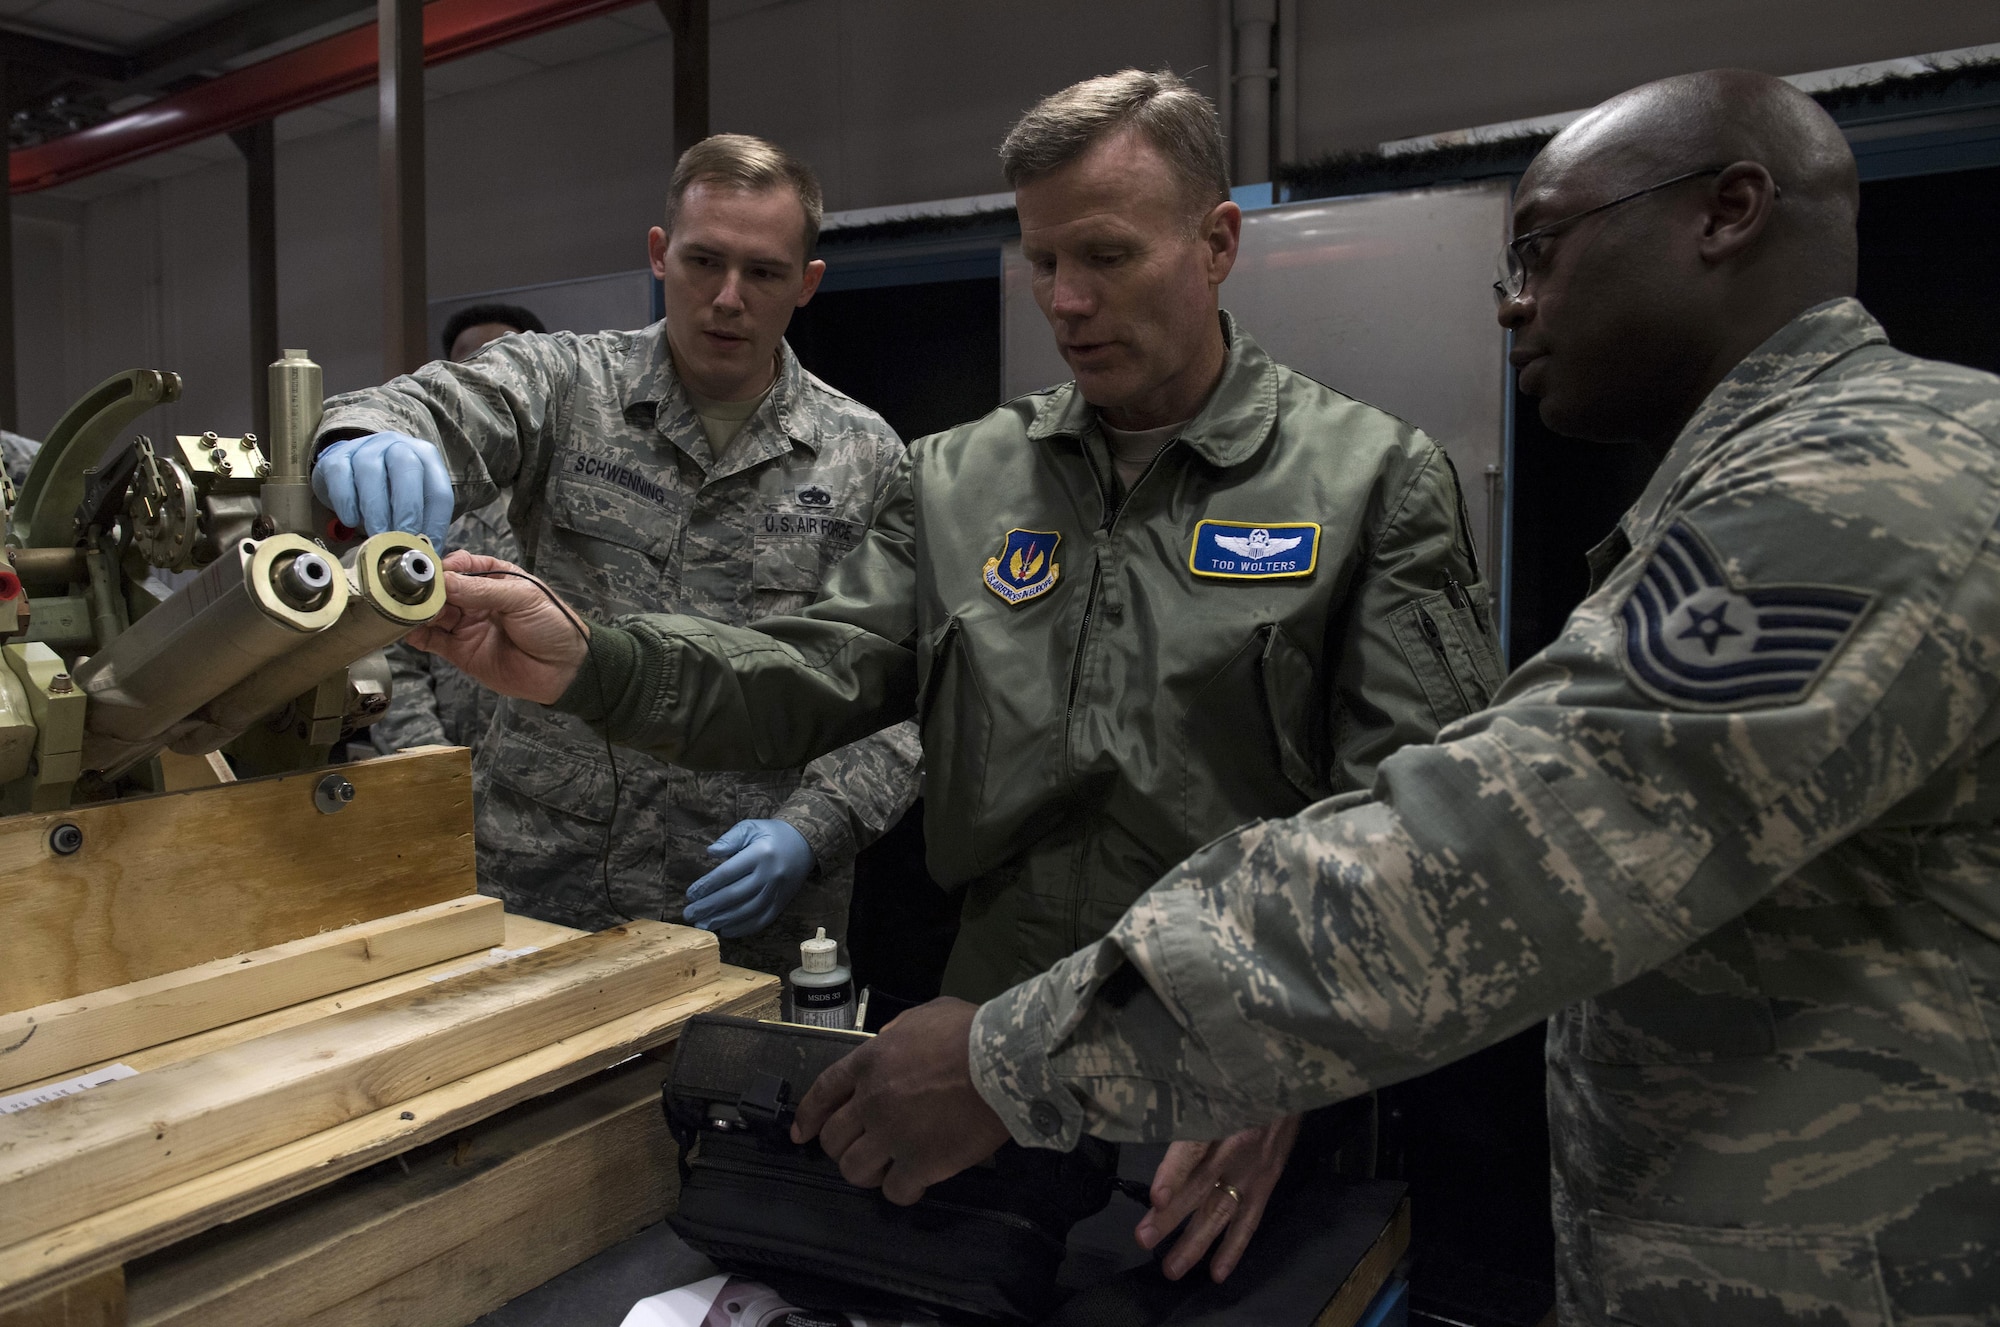 U.S. Air Force Gen. Tod D. Wolters, U.S. Air Forces in Europe and Air Forces Africa commander, tests a piece of equipment for cracks with Tech. Sgt. James Cone and Staff Sgt. Timothy J. Schwenning II, both 86th Maintenance Squadron Nondestructive Inspection technicians, during an immersion tour on Ramstein Air Base, Germany, Oct. 23, 2017. Wolters coined all four Airmen assigned to the shop for their efforts in finding the best course of action for detecting cracks in the equipment saving the Air Force money. (U.S. Air Force photo by Senior Airman Tryphena Mayhugh)